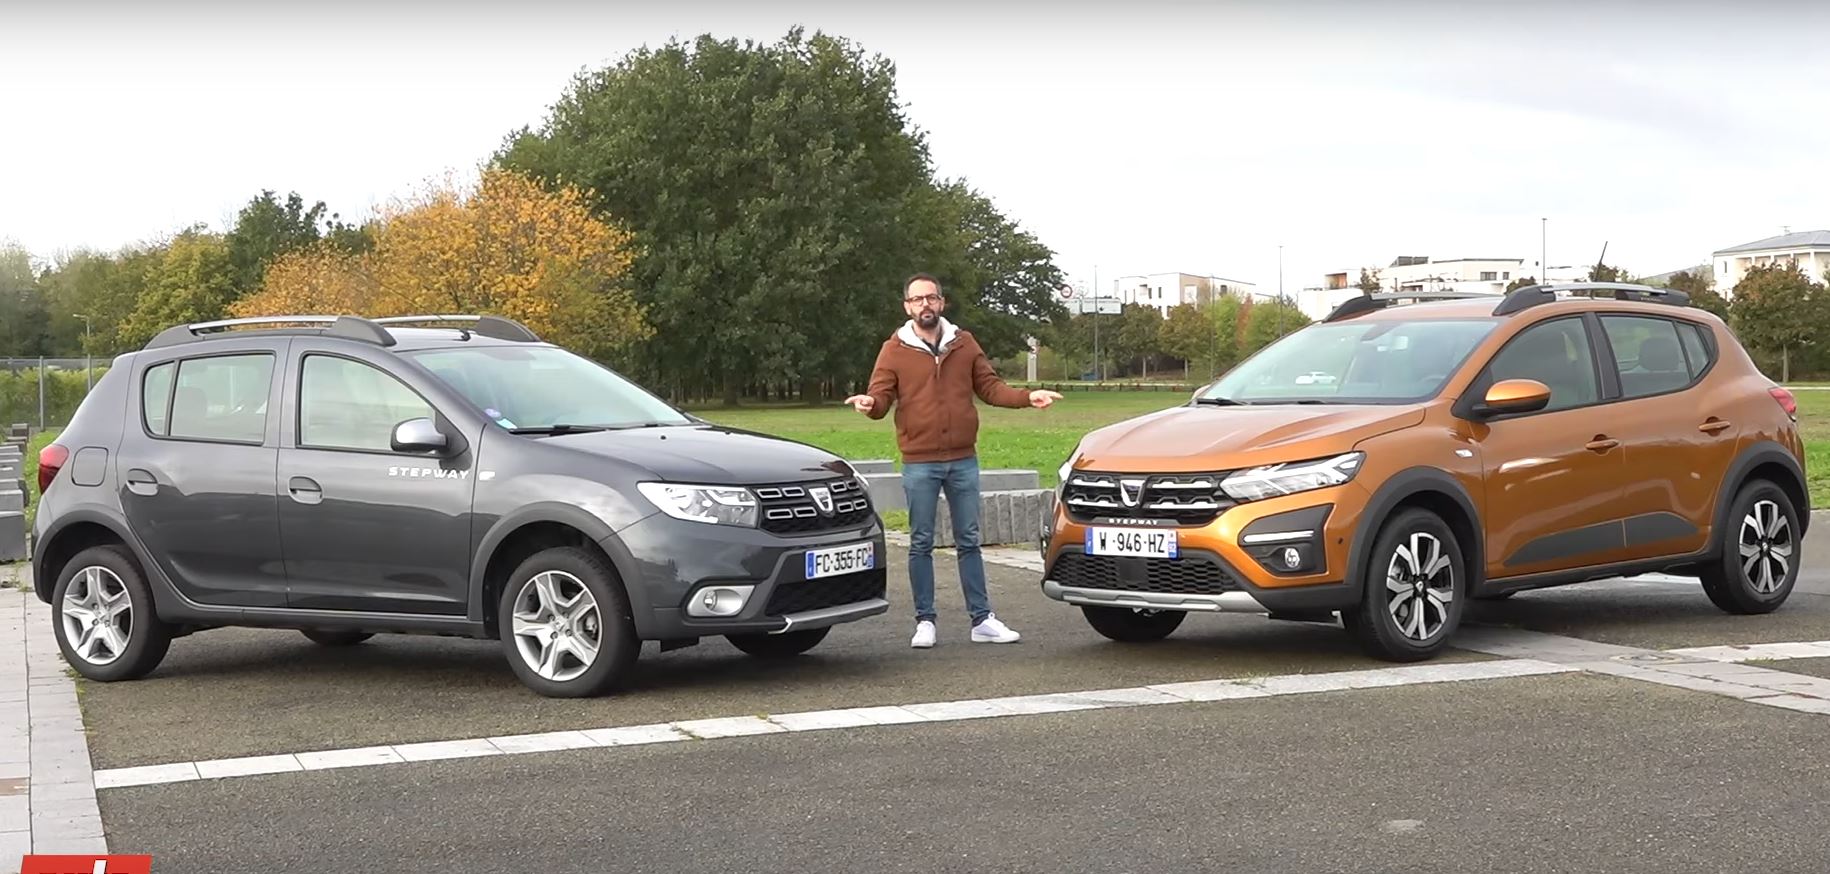 2021 Dacia Sandero Compared to Old Generation, New Hatch Is More Modern -  autoevolution